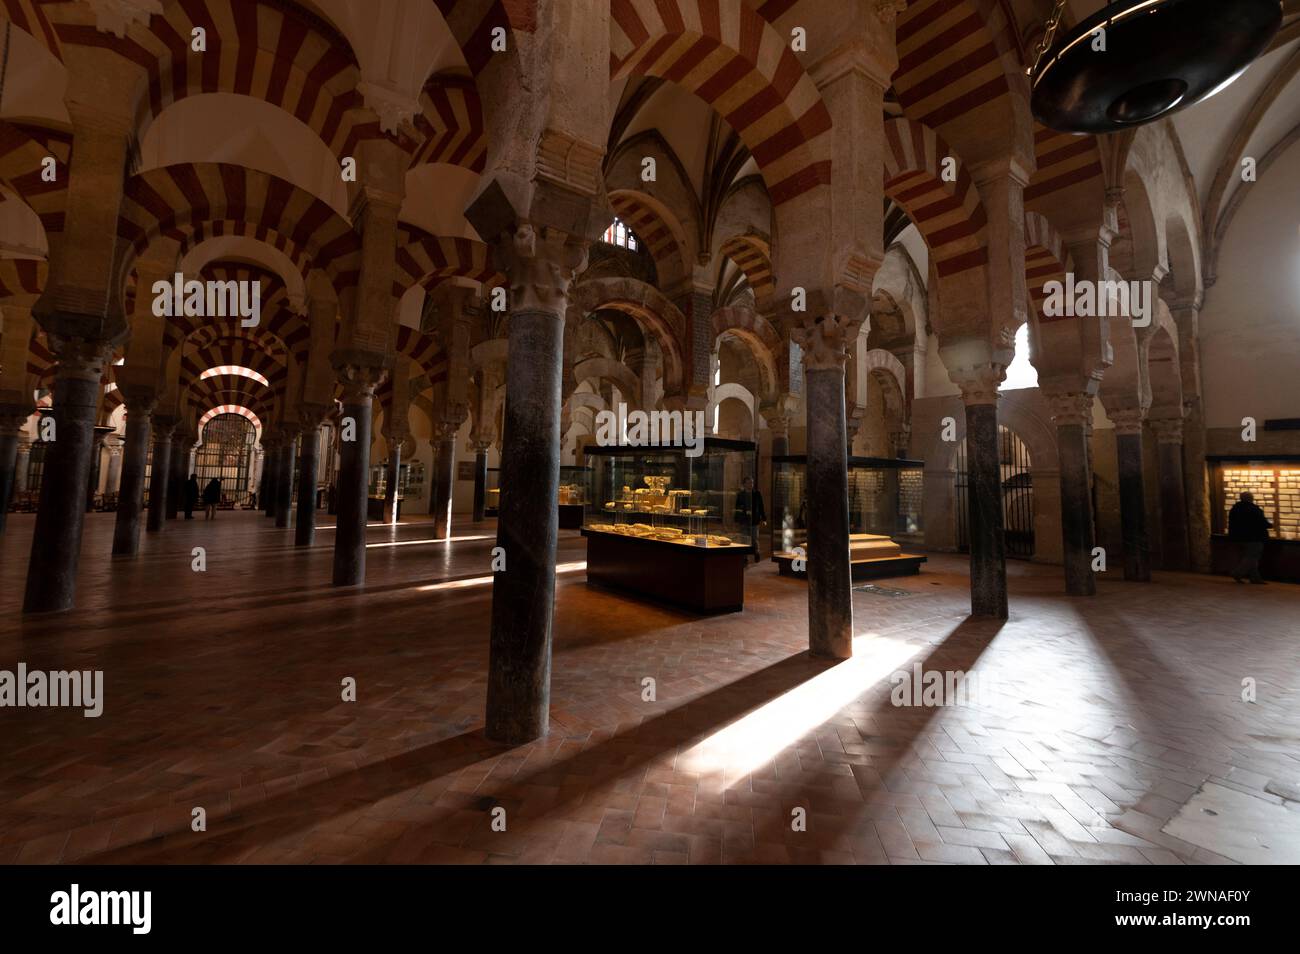 Mosque/ Cathedral of Cordoba  Some of the glass cases with a display of exhibits under the high arch ceilings supporting a huge roof by 853 thick marble Stock Photo